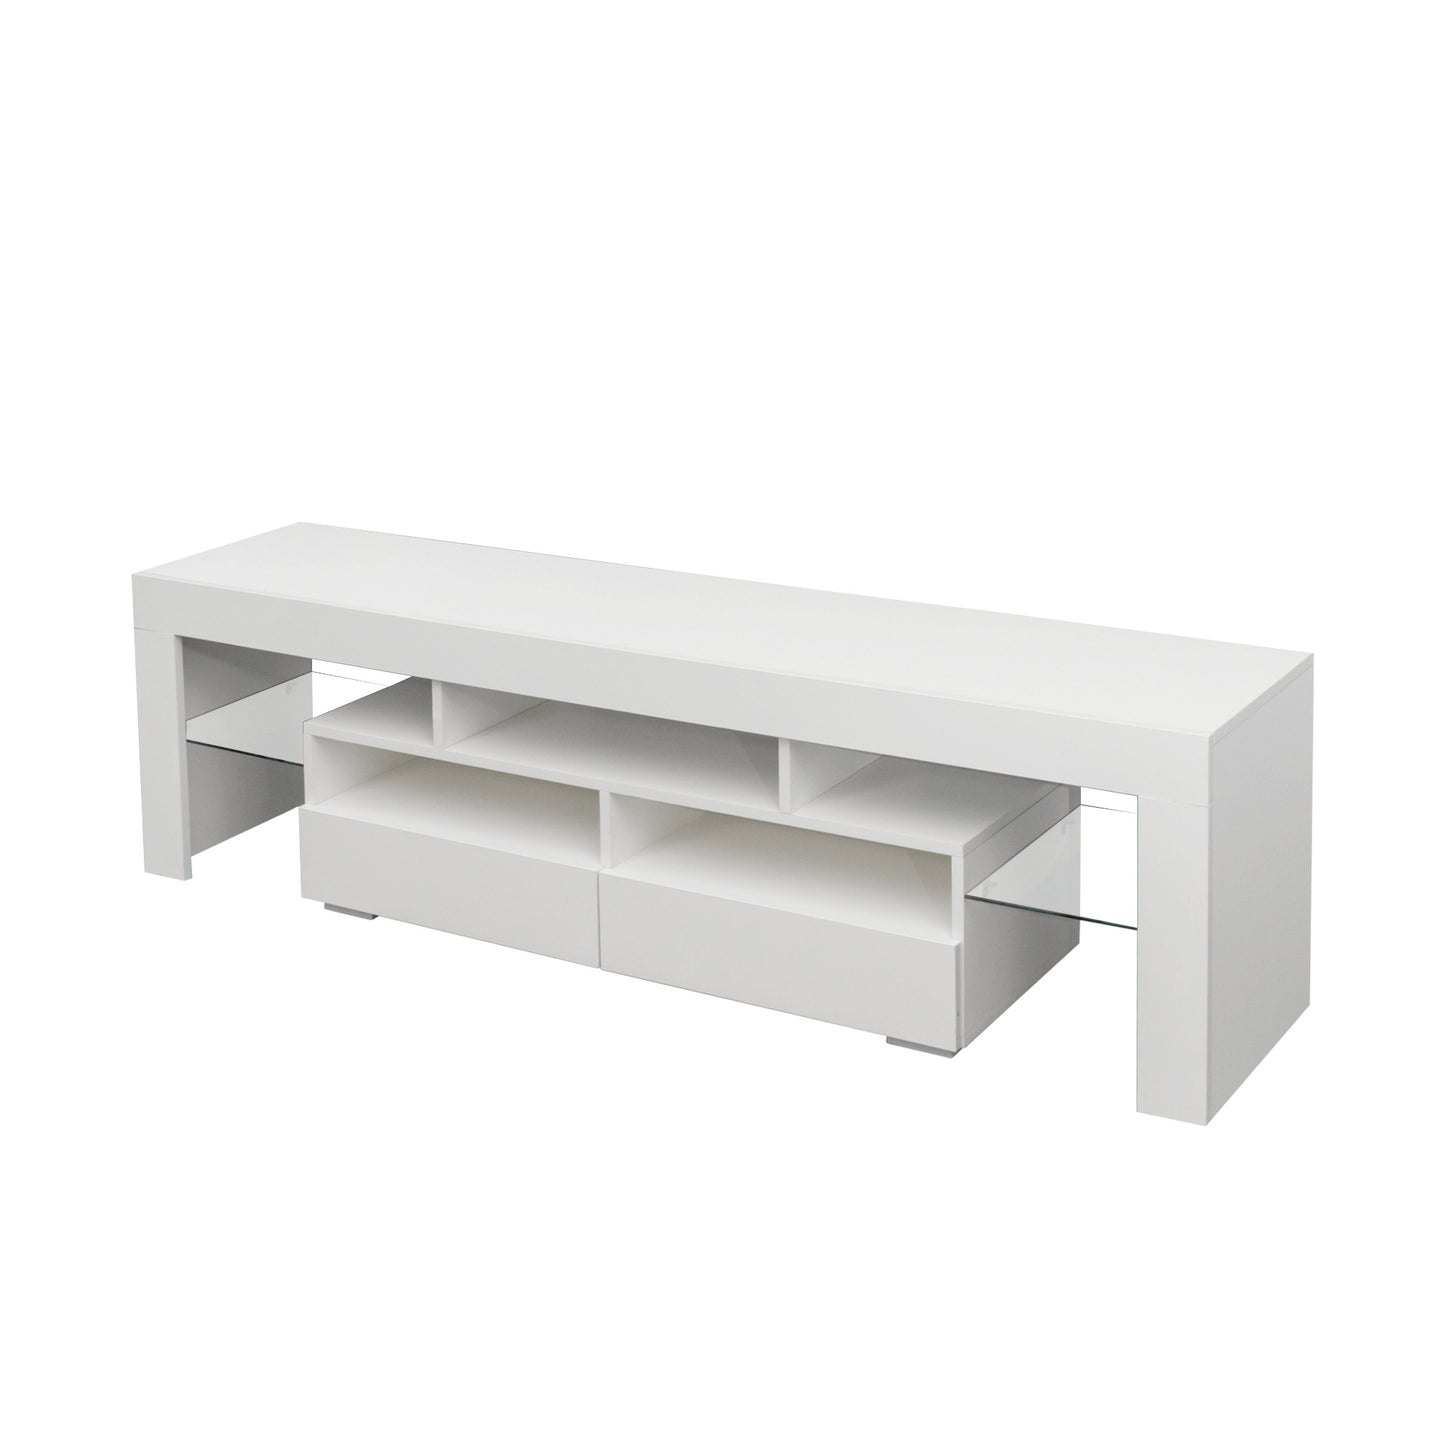 1st Choice Modern Living Room Furniture TV Stand Cabinet in White